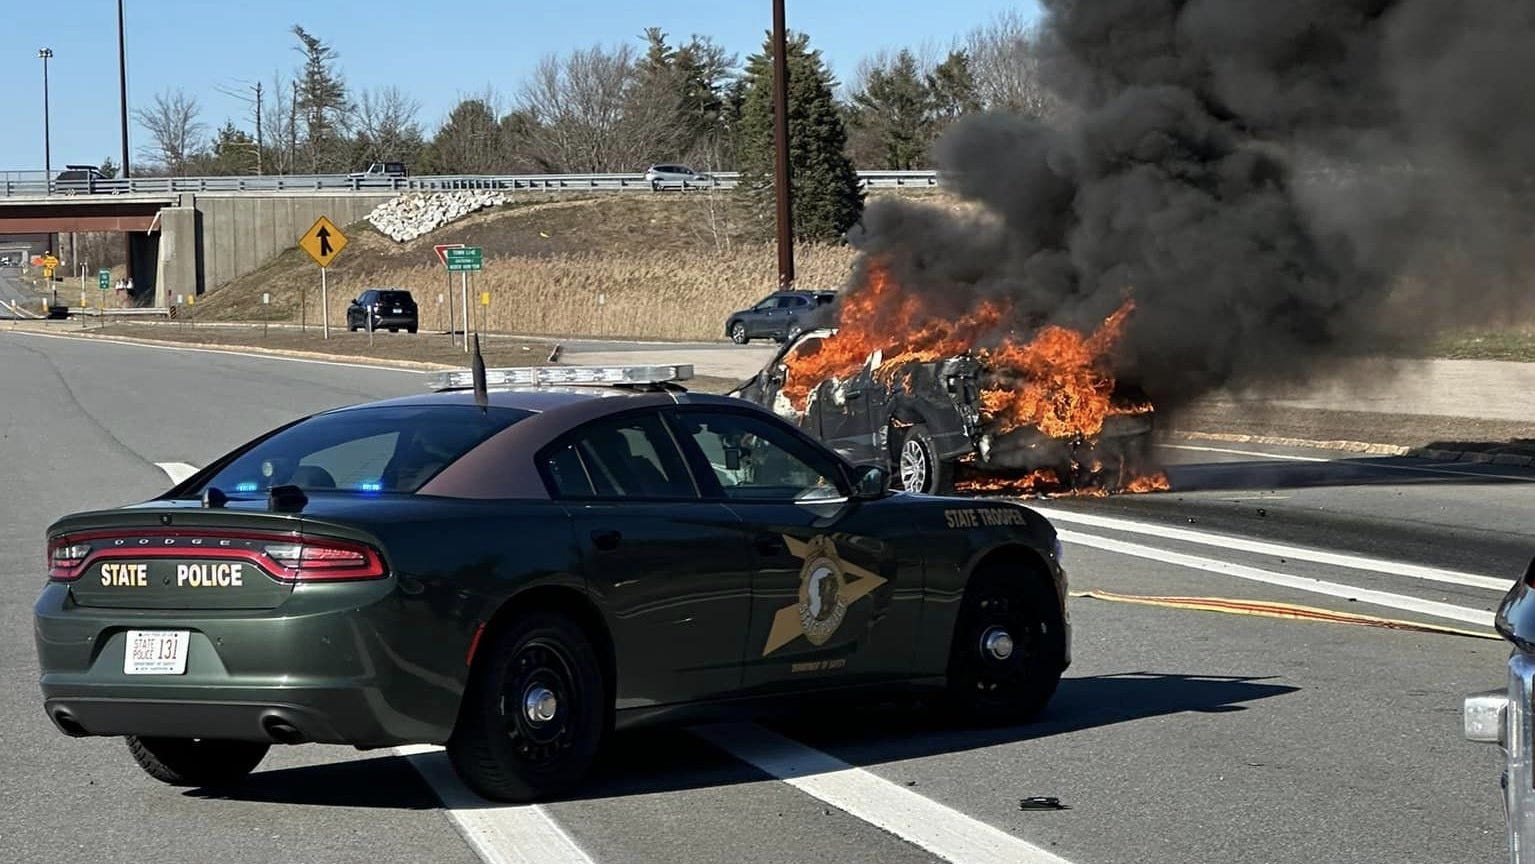  Hampton I-95 crash: Maine man seriously injured in fiery crash at toll booth 